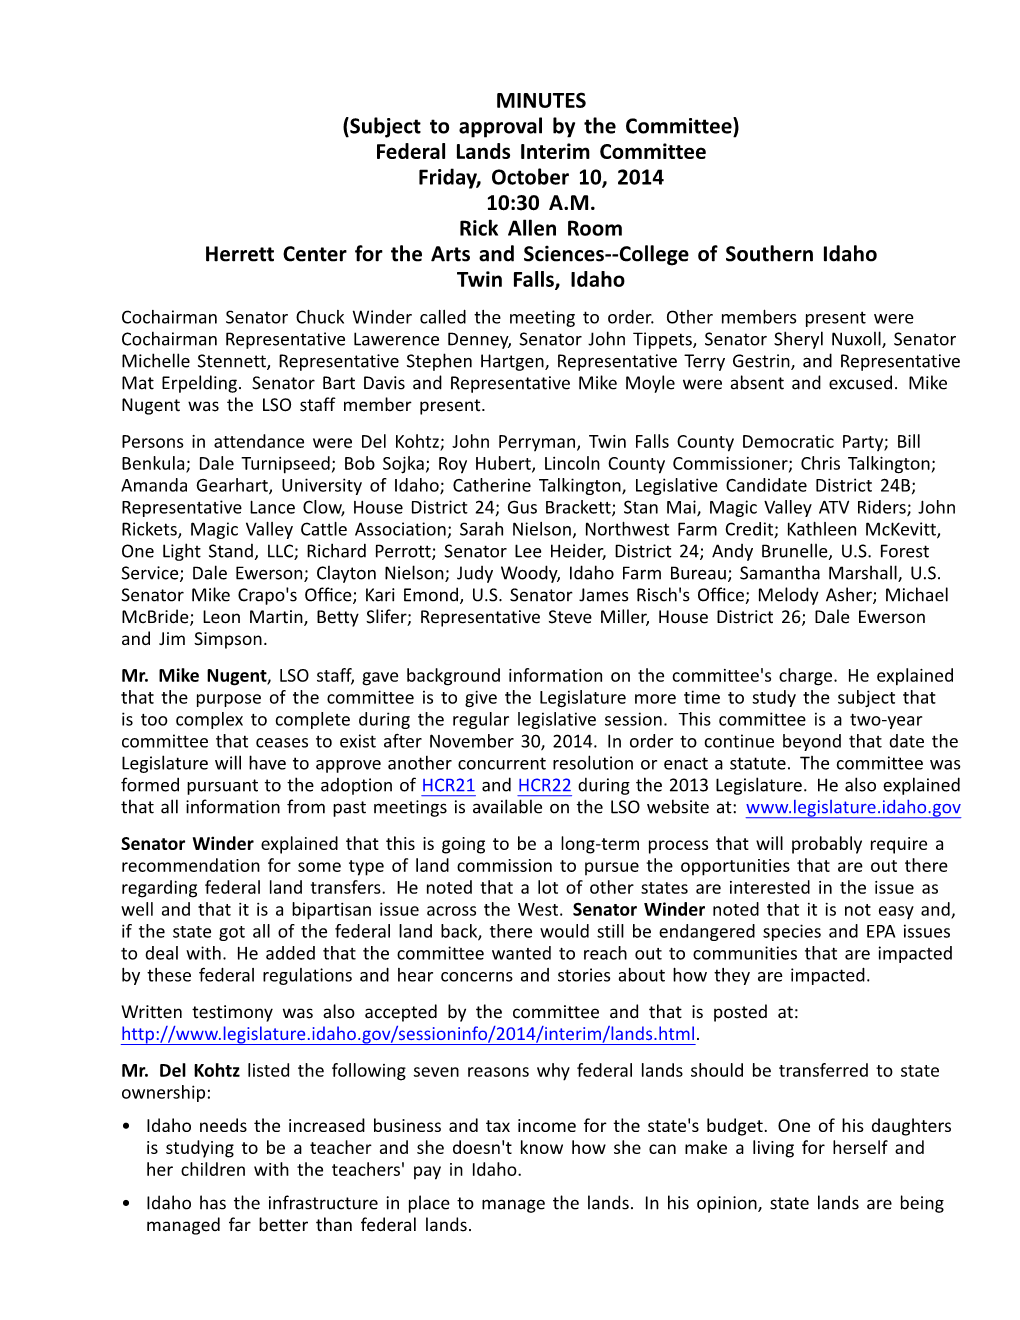 Federal Lands Interim Committee Friday, October 10, 2014 10:30 A.M